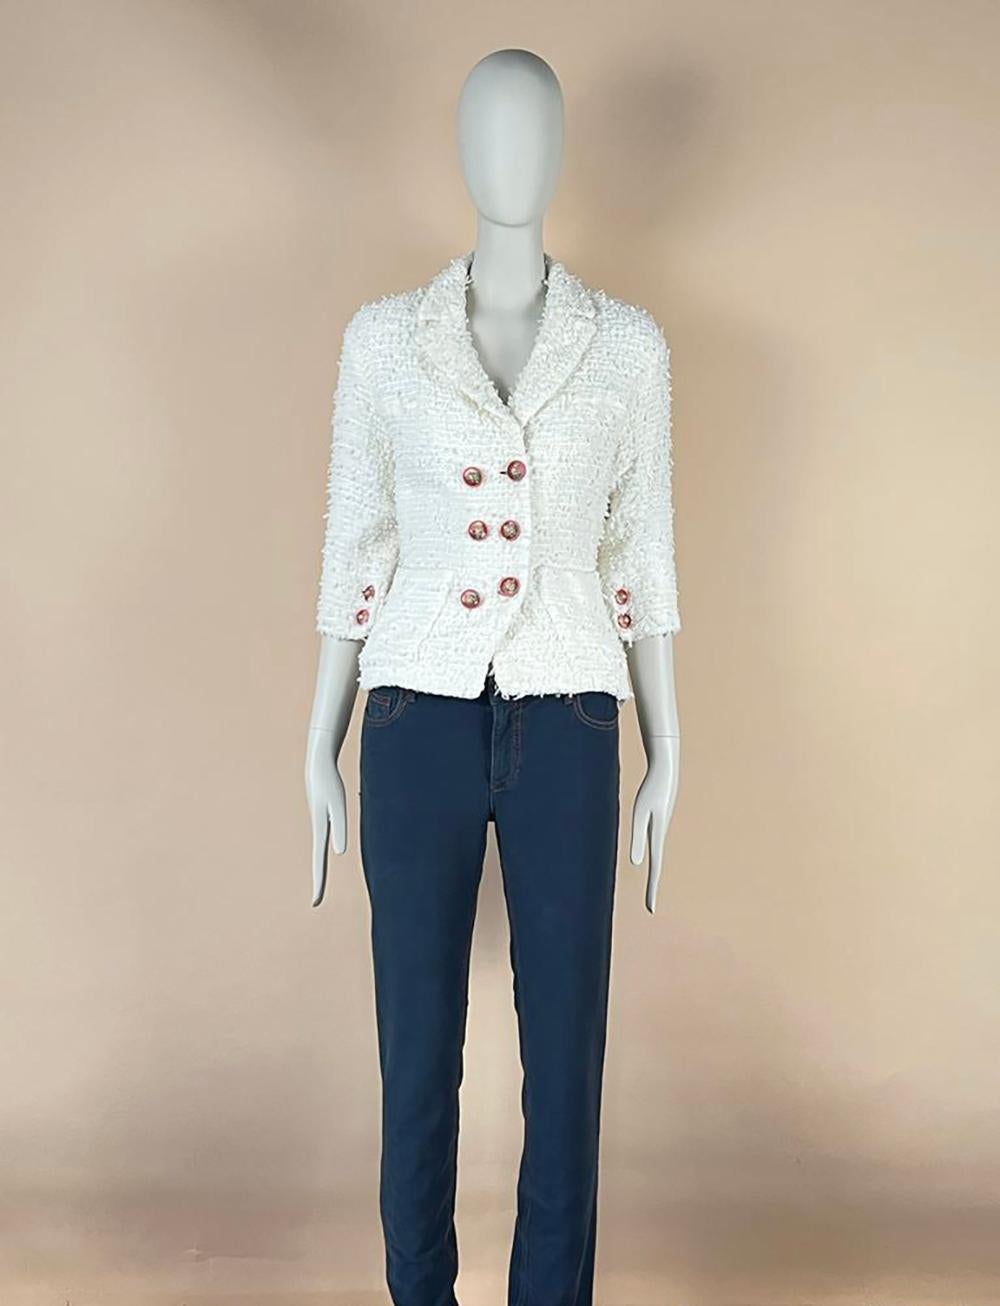 Chanel Iconic CC Buttons Little White Jacket 5